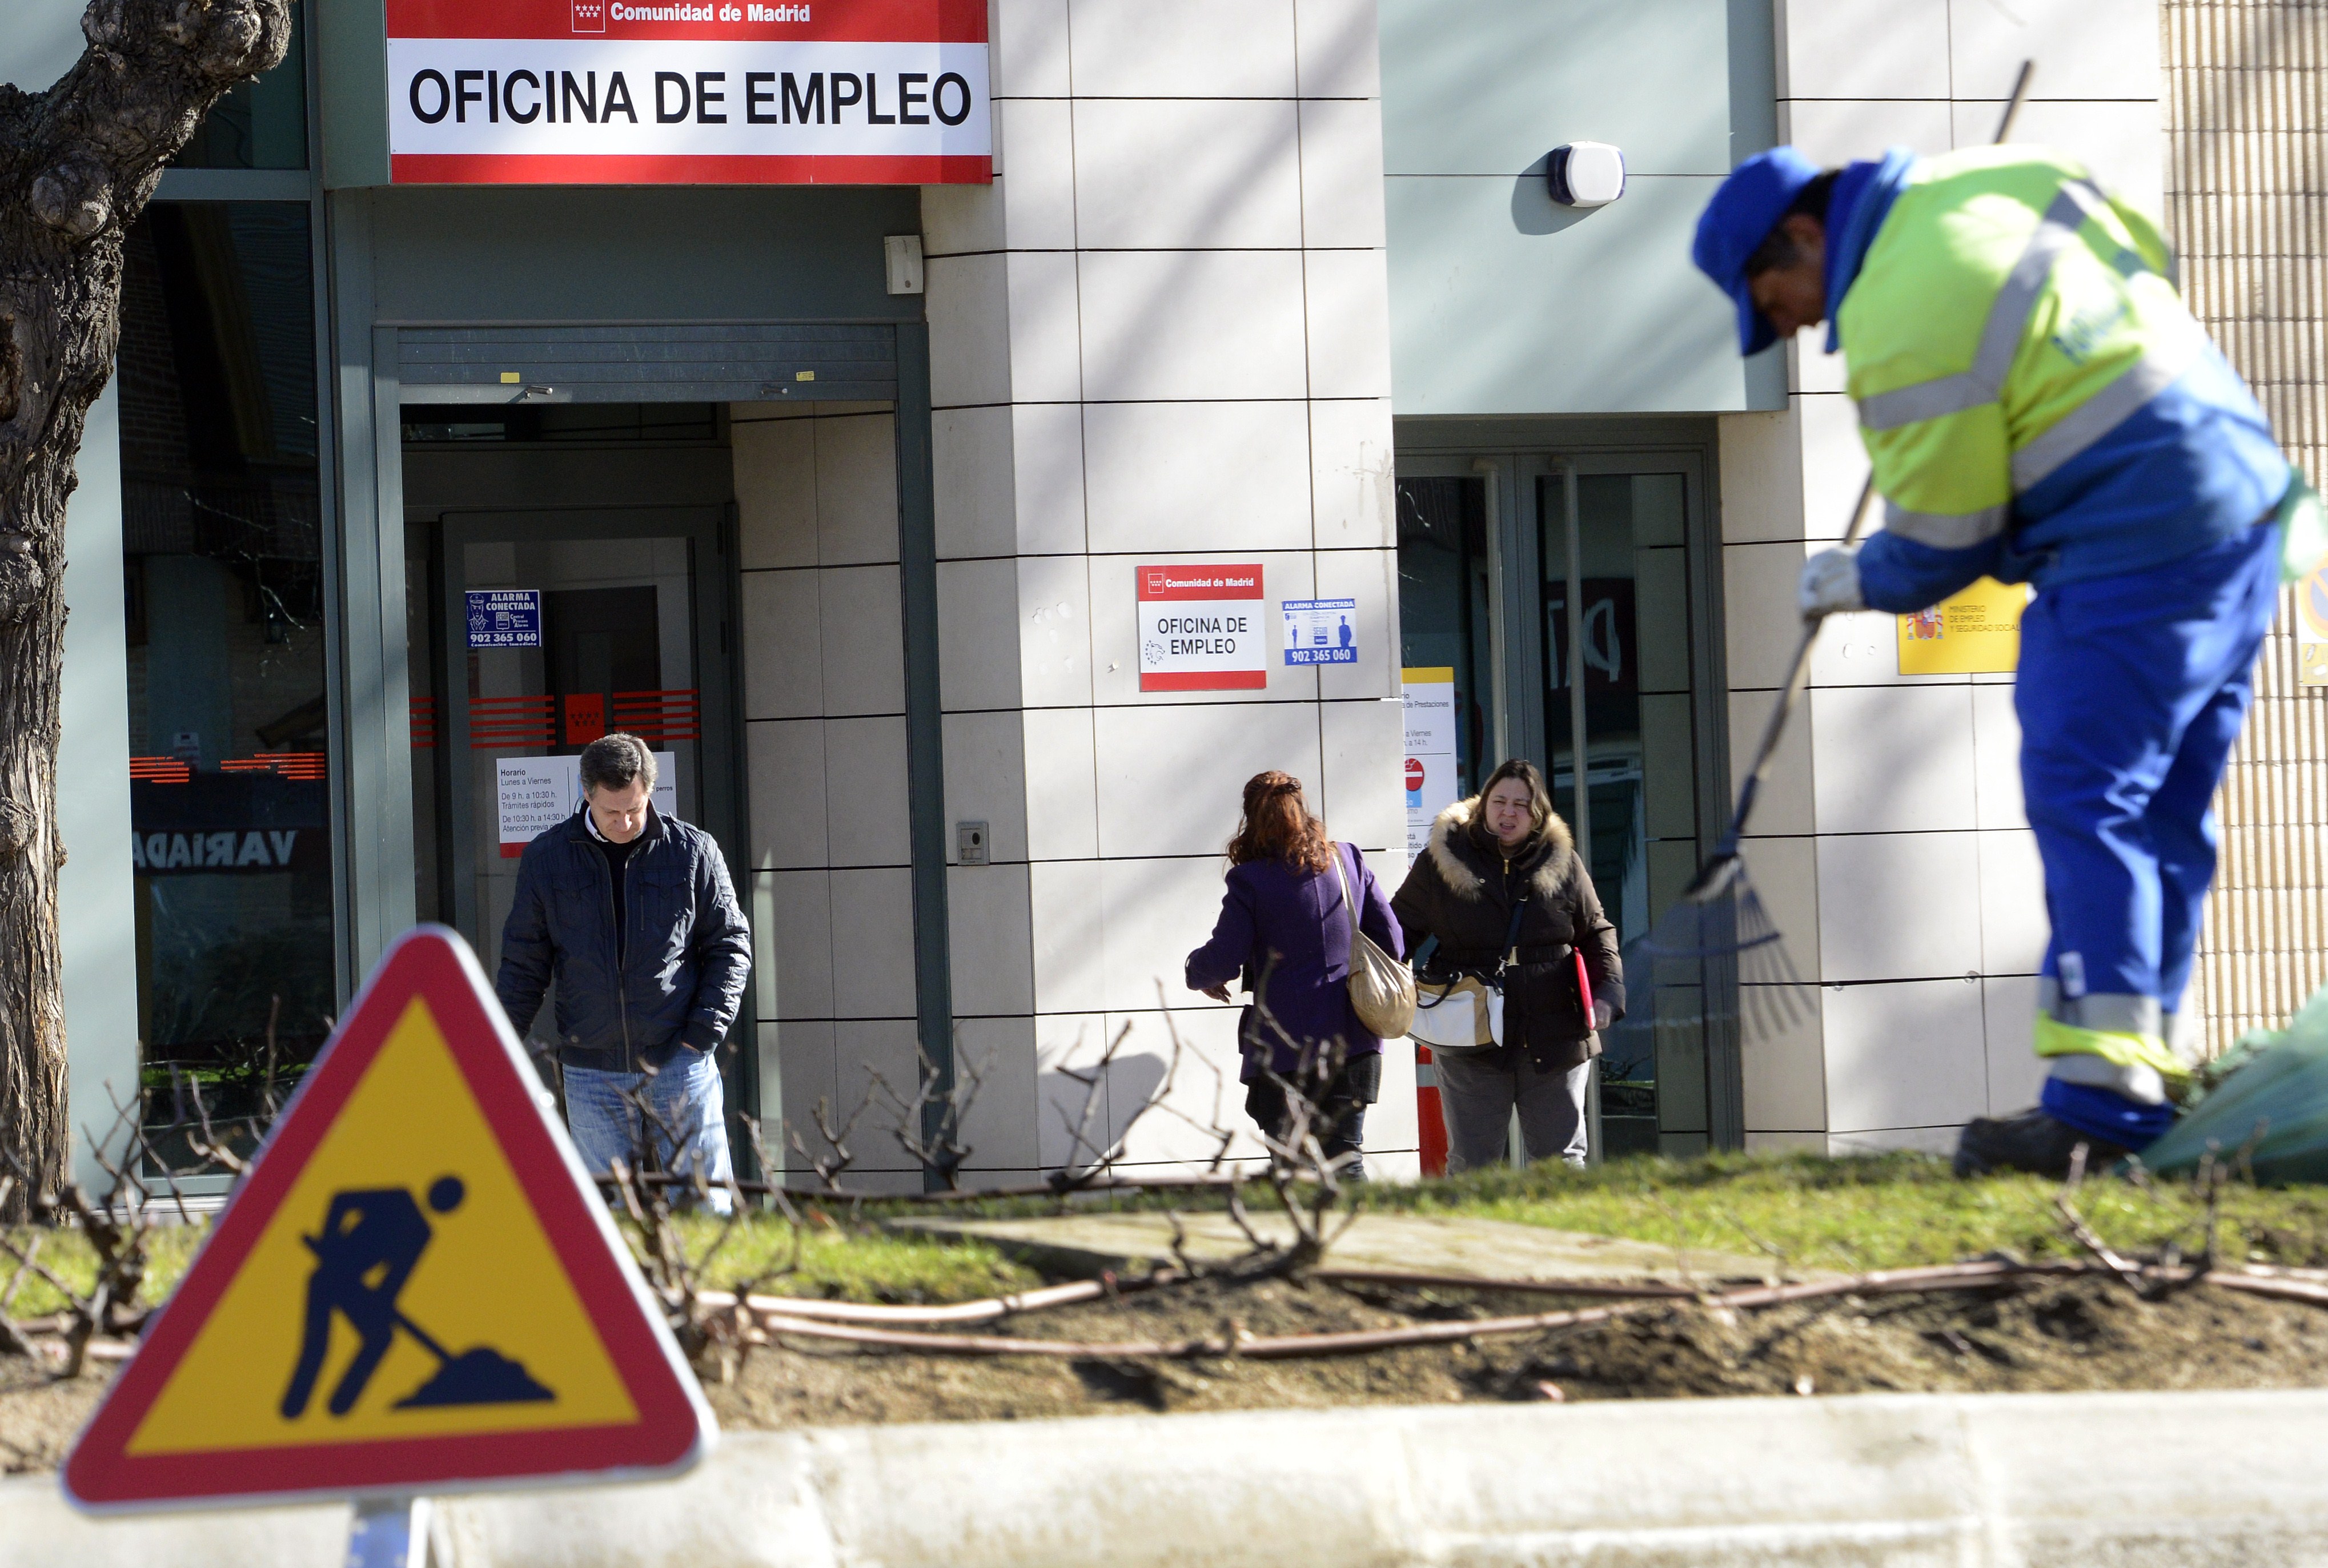 A municipal worker cleans the ground as people walk outside a government employment office in Madrid on January 23, 2014. (GERARD JULIEN / AFP / Getty Images)